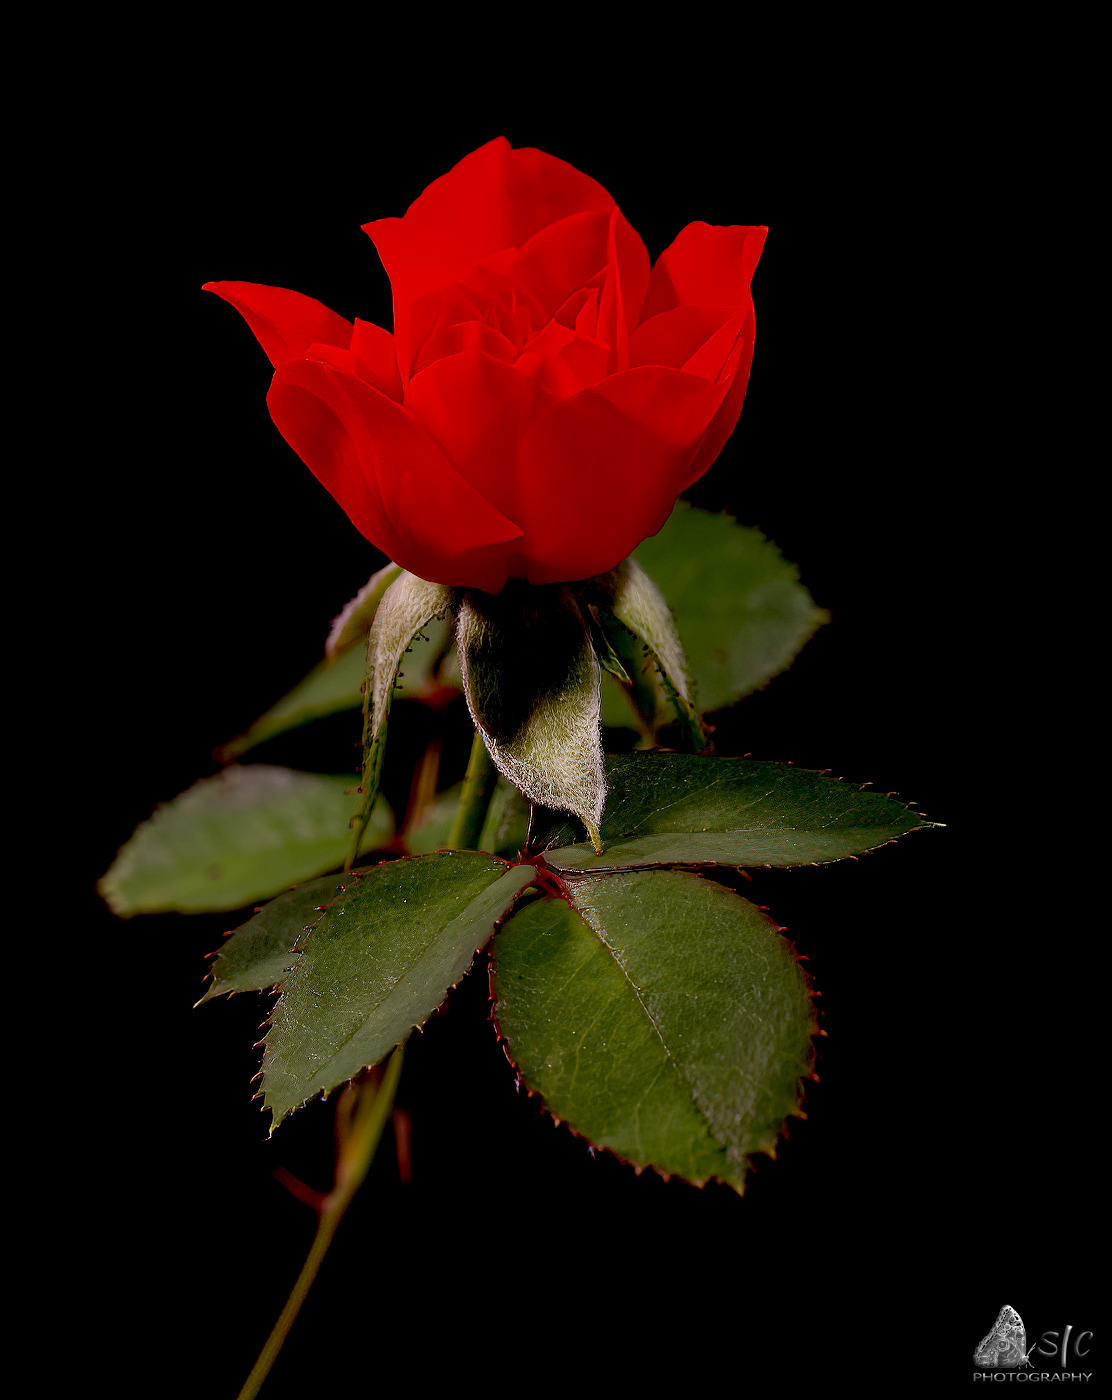 Small Red rose